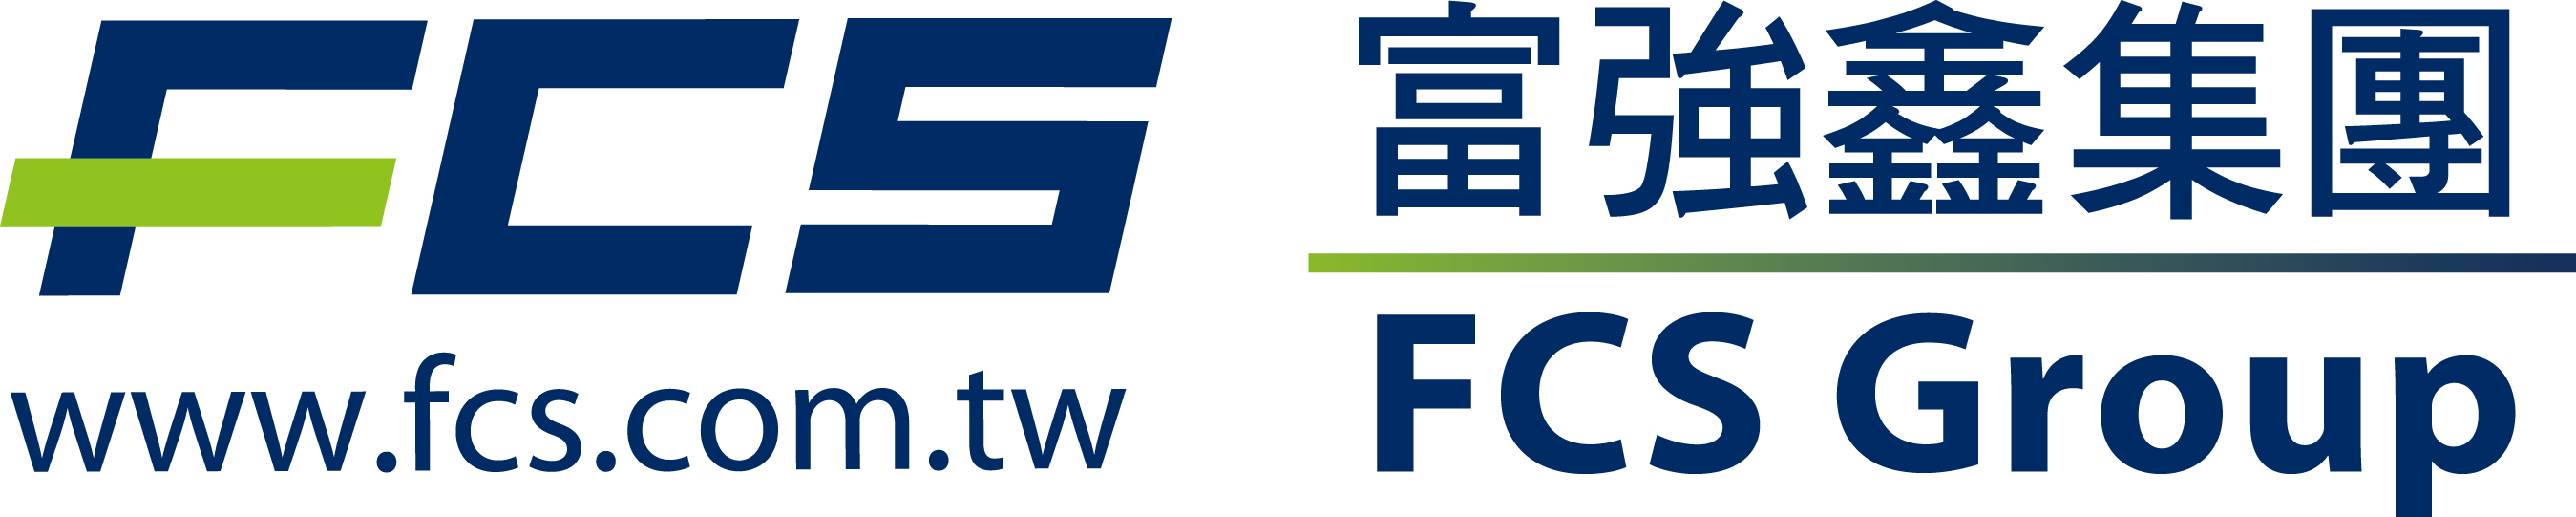 FCS LOGO+group - FCS GROUP 富強鑫